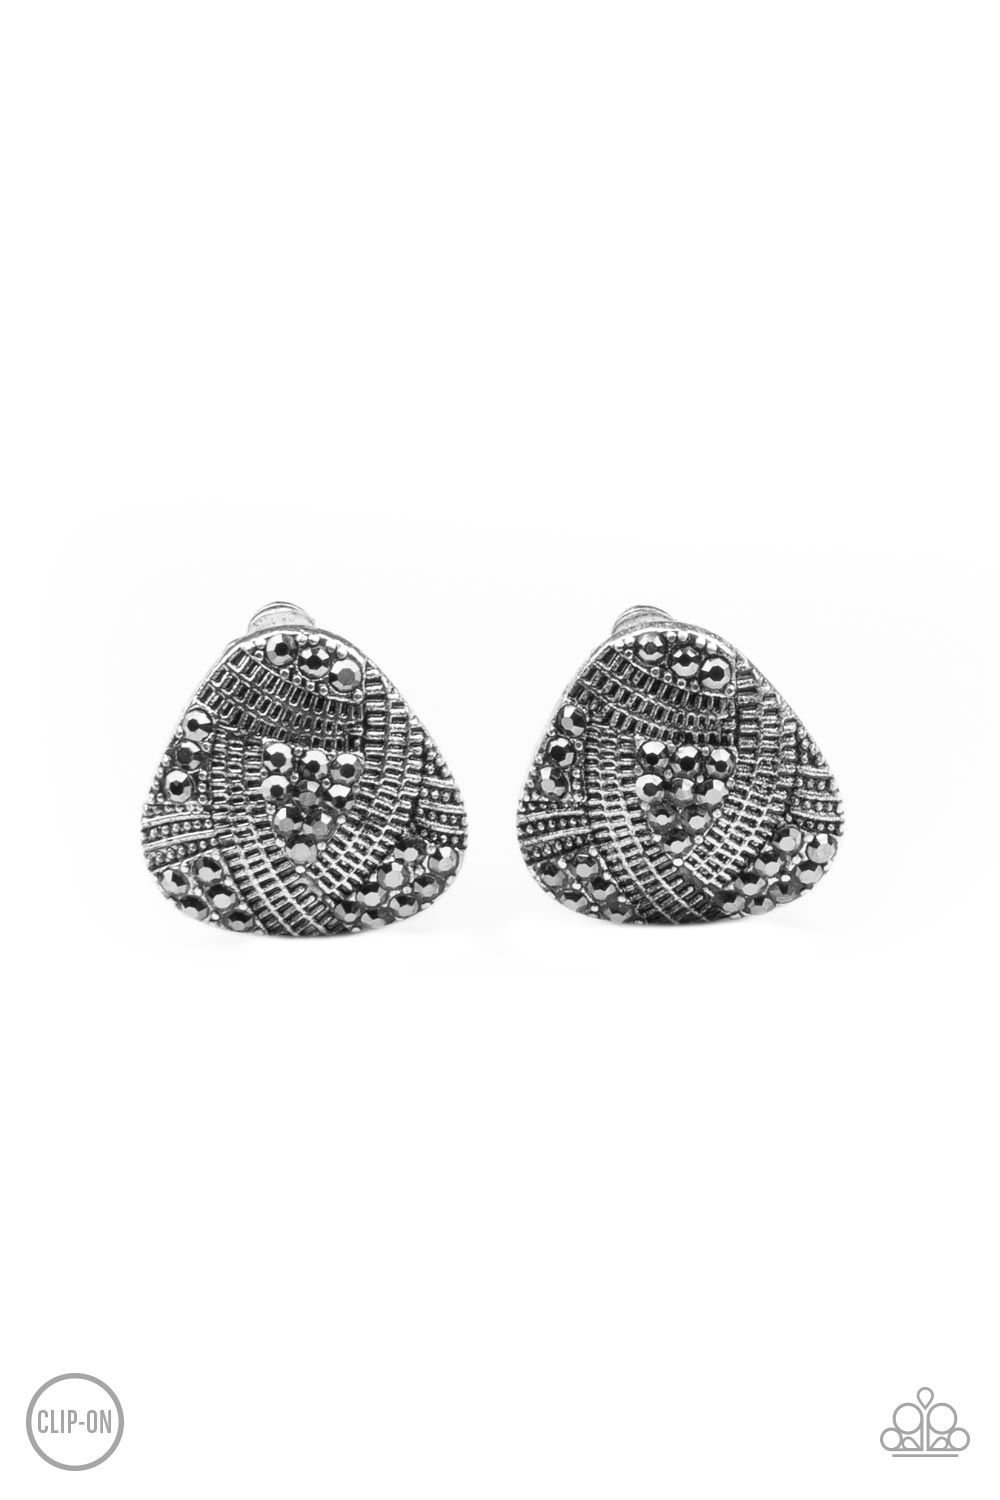 Gorgeously Galleria - silver - Paparazzi CLIP ON earrings